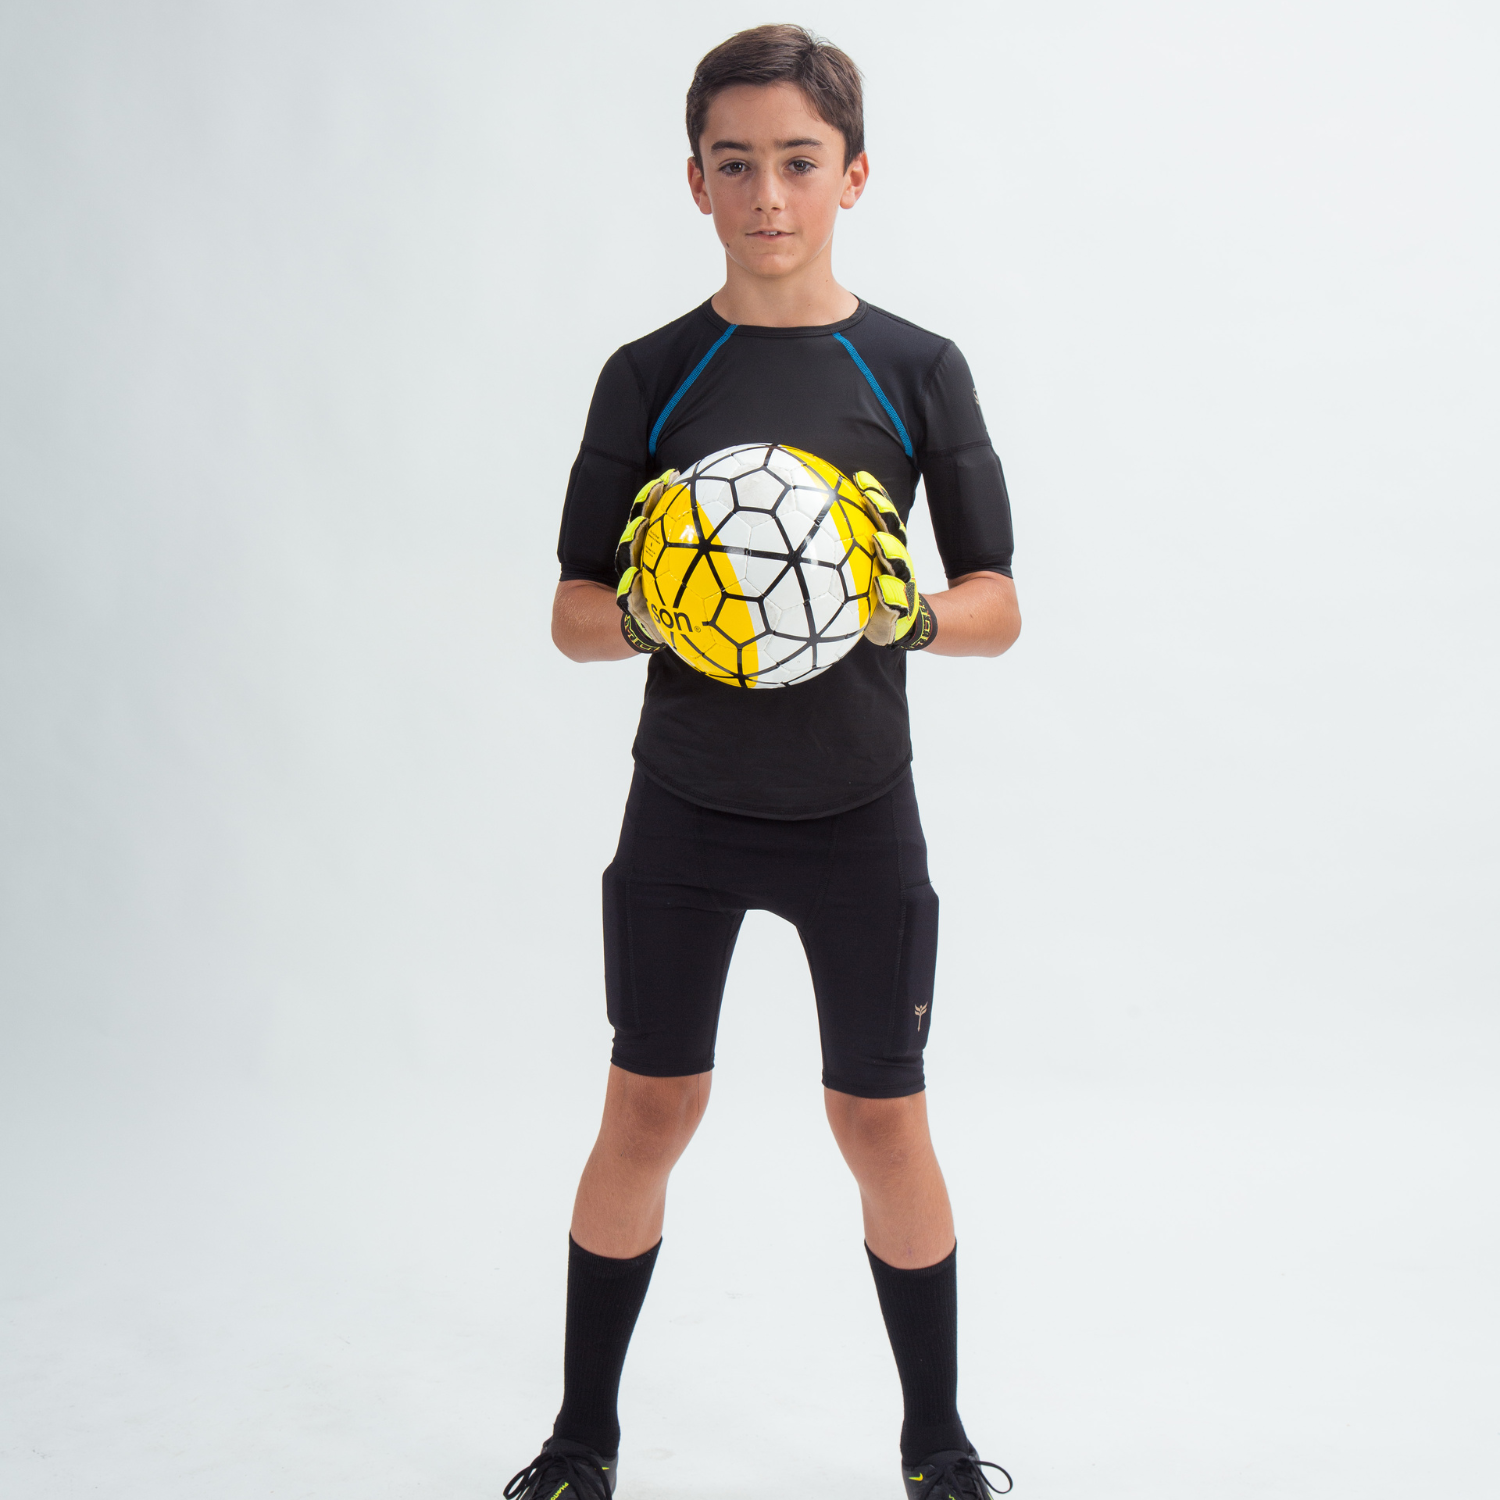 Boy's black weighted training short for sports and strength training.